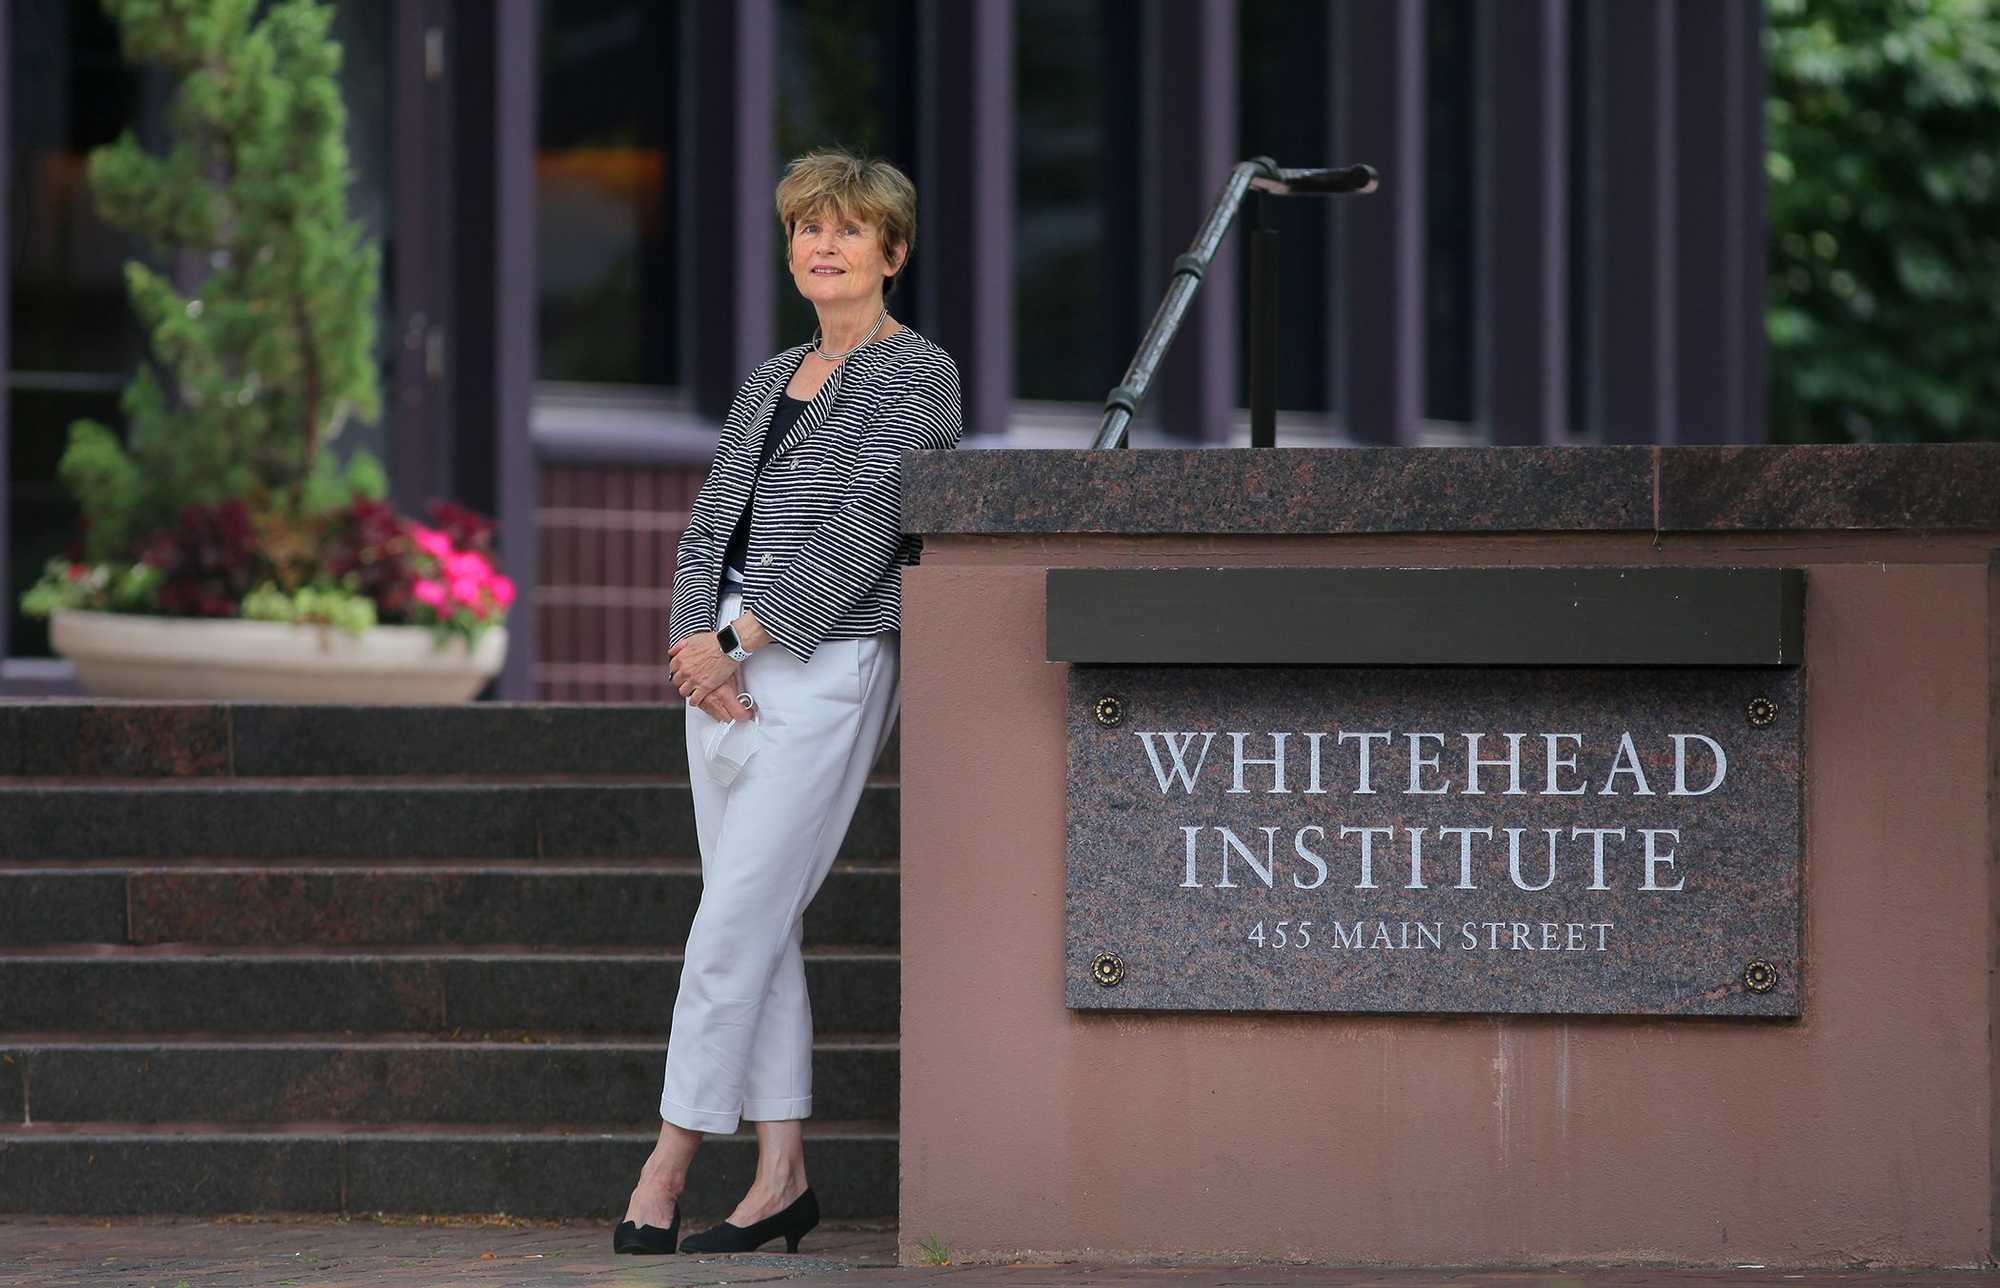 Ruth Lehmann outside the Whitehead Institute in Kendall Square in Cambridge in early July 2020, just days after taking over as its new director.  